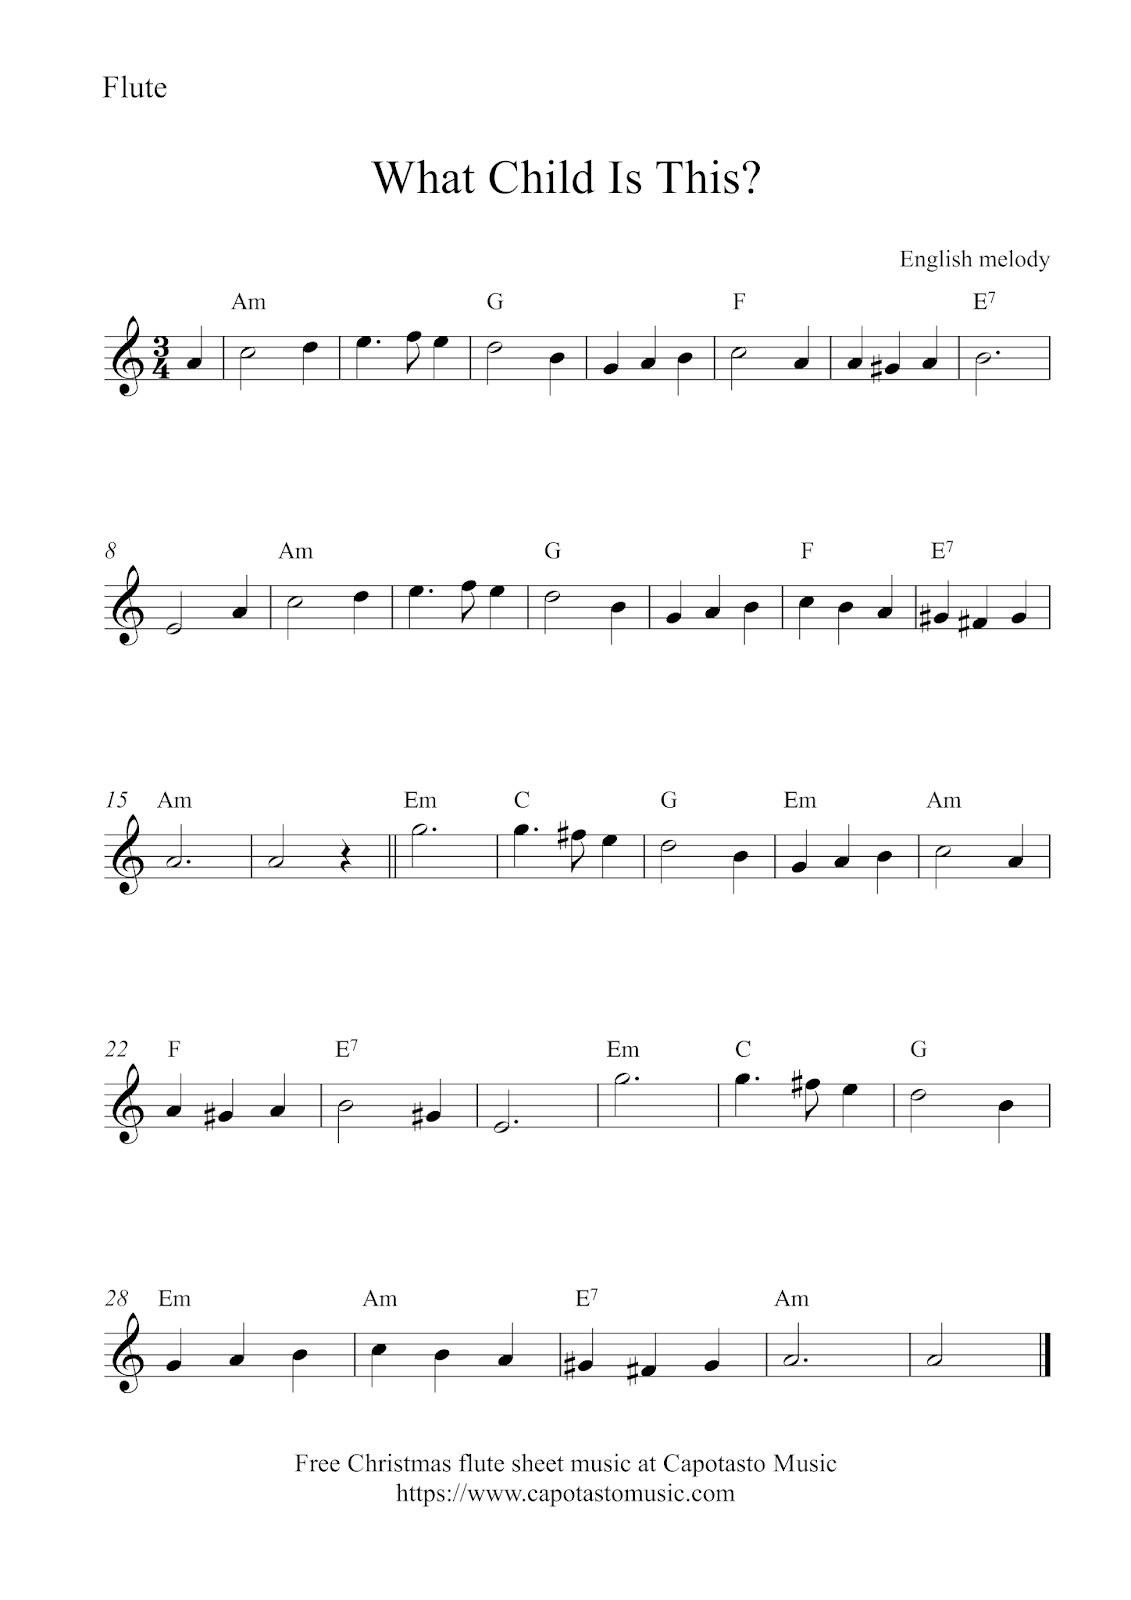 Free Christmas Flute Sheet Music | What Child Is This? - Free Printable Flute Music